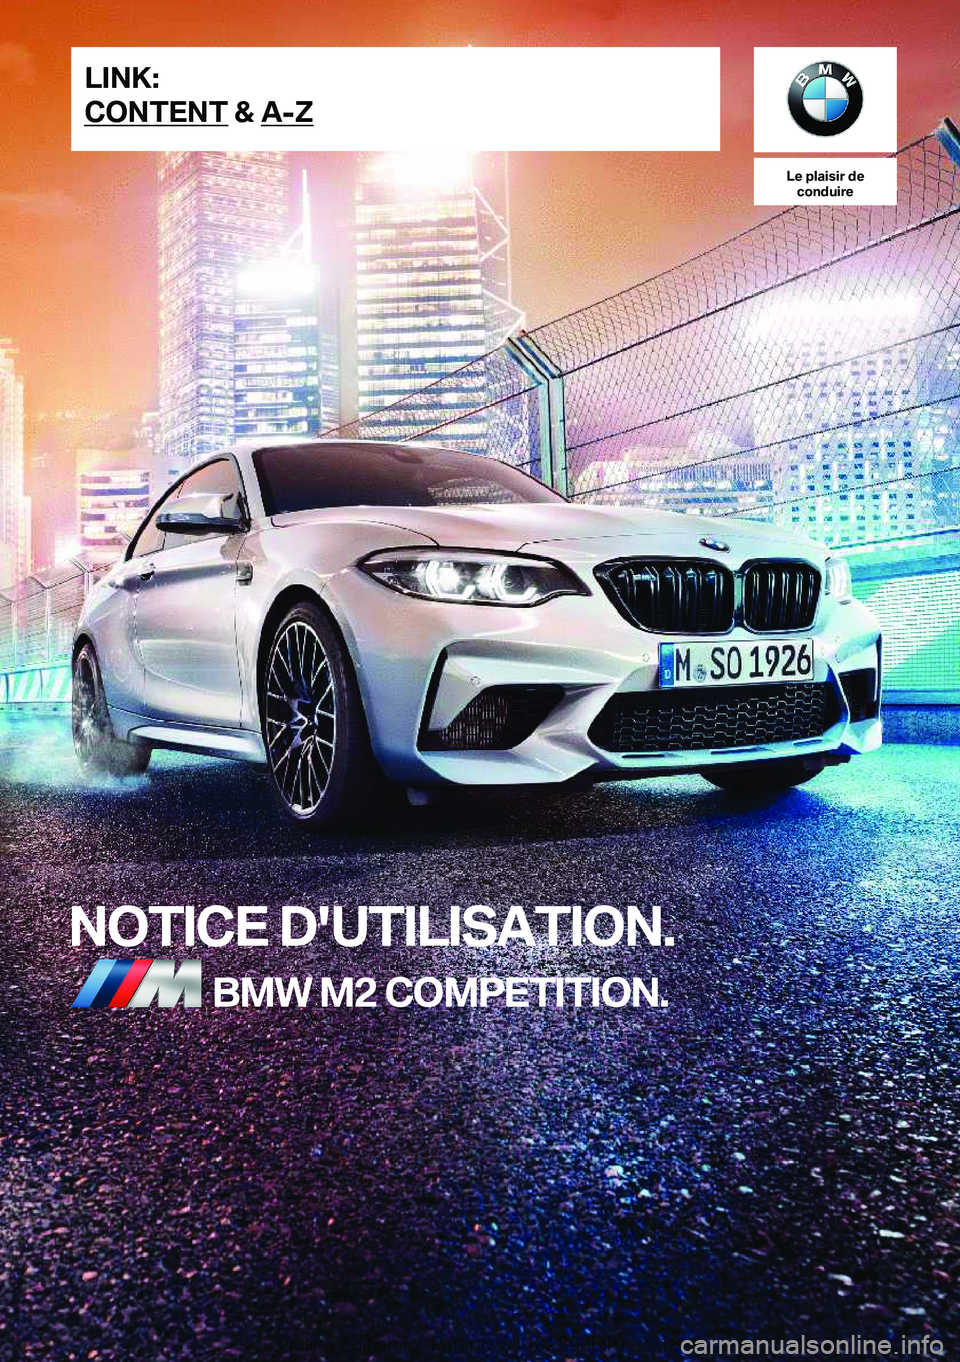 BMW M2 2019  Notices Demploi (in French) �L�e��p�l�a�i�s�i�r��d�e�c�o�n�d�u�i�r�e
�N�O�T�I�C�E��D�'�U�T�I�L�I�S�A�T�I�O�N�.�B�M�W��M�2��C�O�M�P�E�T�I�T�I�O�N�.�L�I�N�K�:
�C�O�N�T�E�N�T��&��A�-�;�O�n�l�i�n�e��E�d�i�t�i�o�n��f�o�r